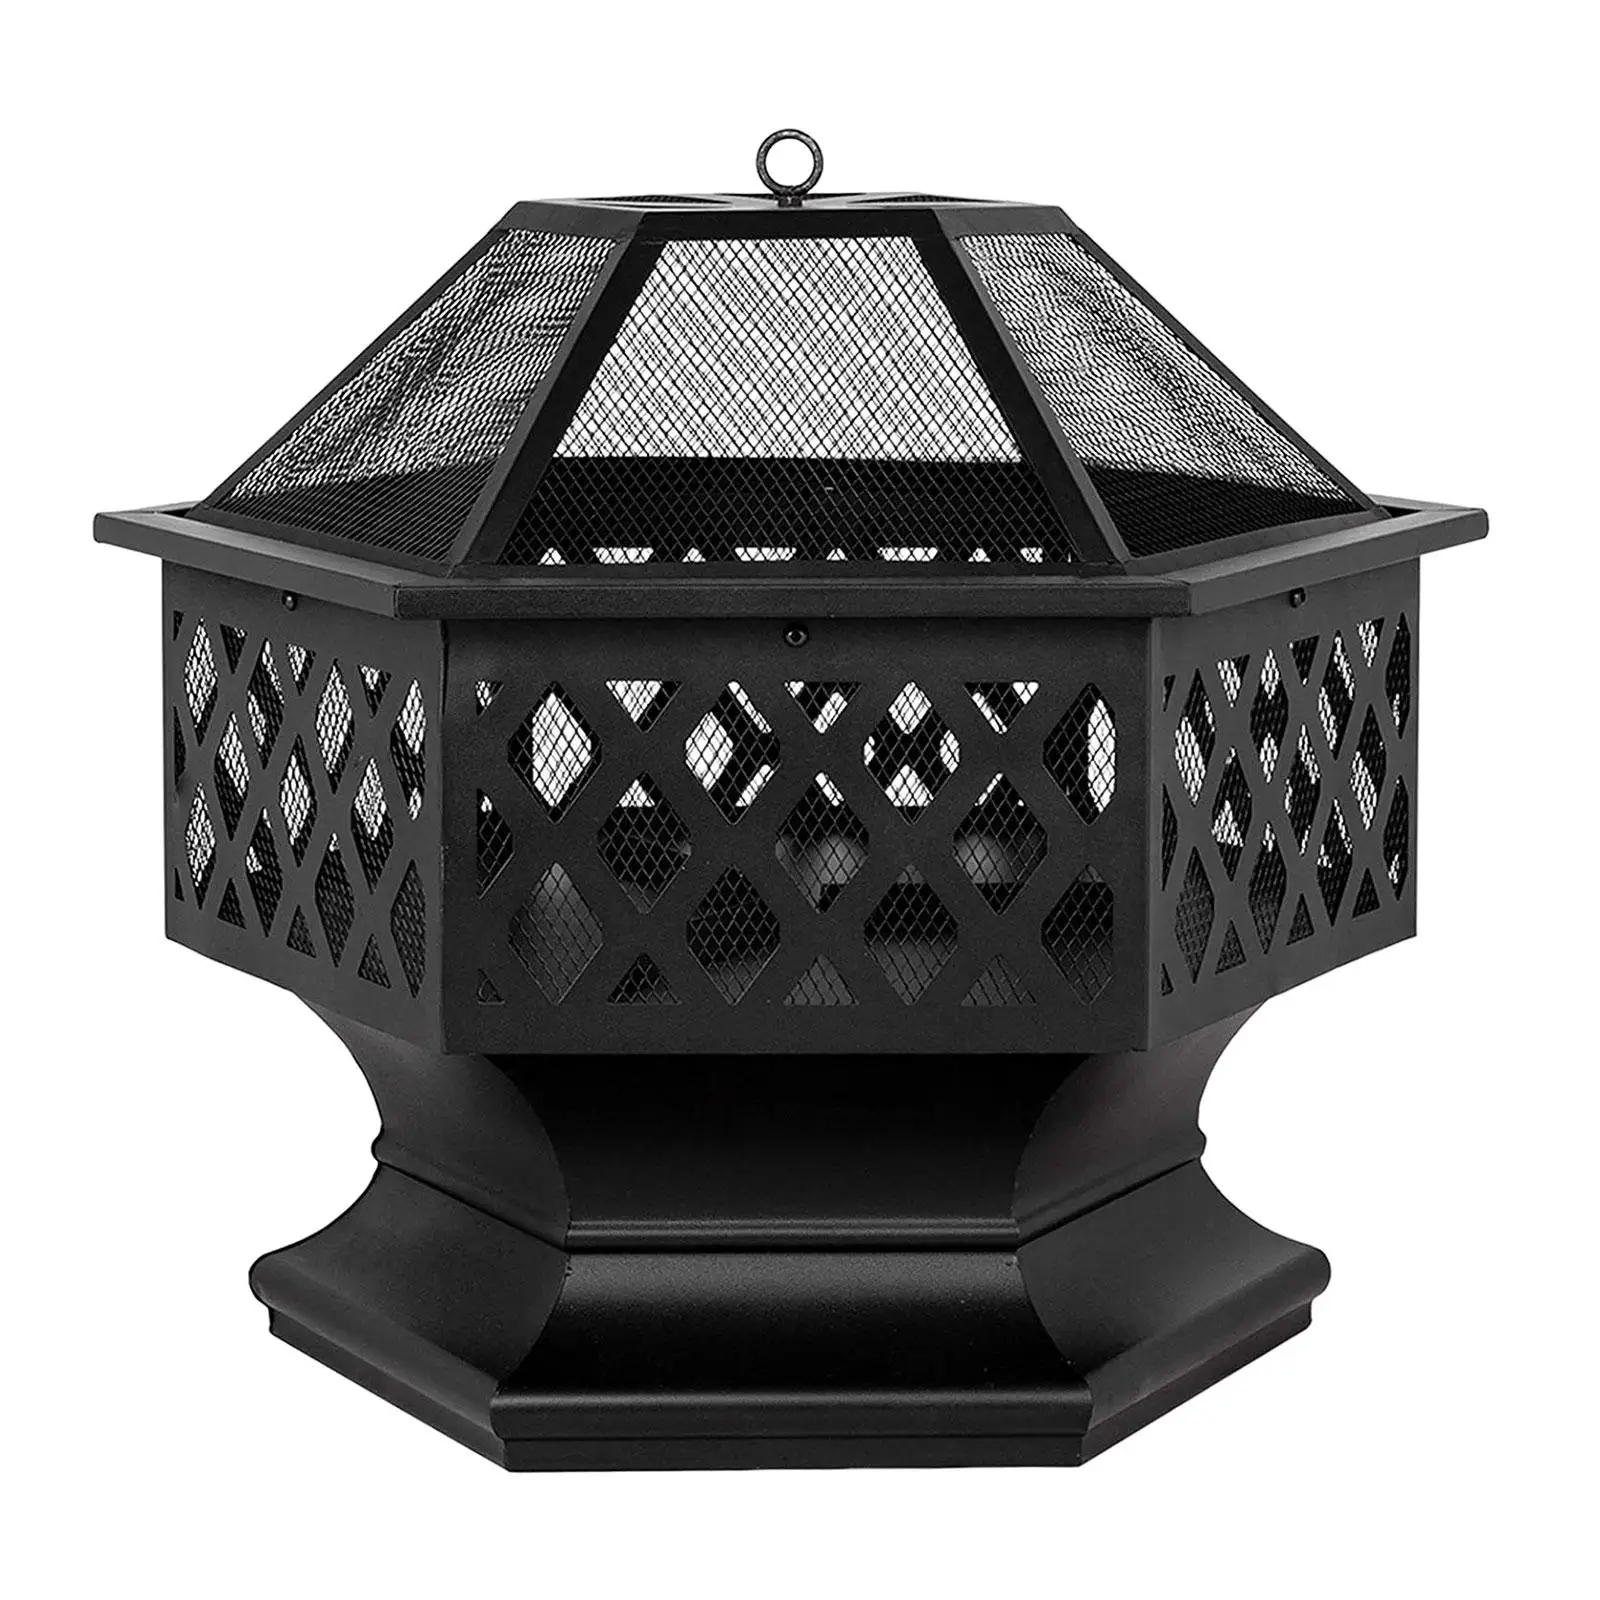 

Hexagonal Outdoor Fire pits Patio Heater Wood Burning pits Outdoor Fireplaces Courtyard Fire pits for Barbecue Courtyard Camping